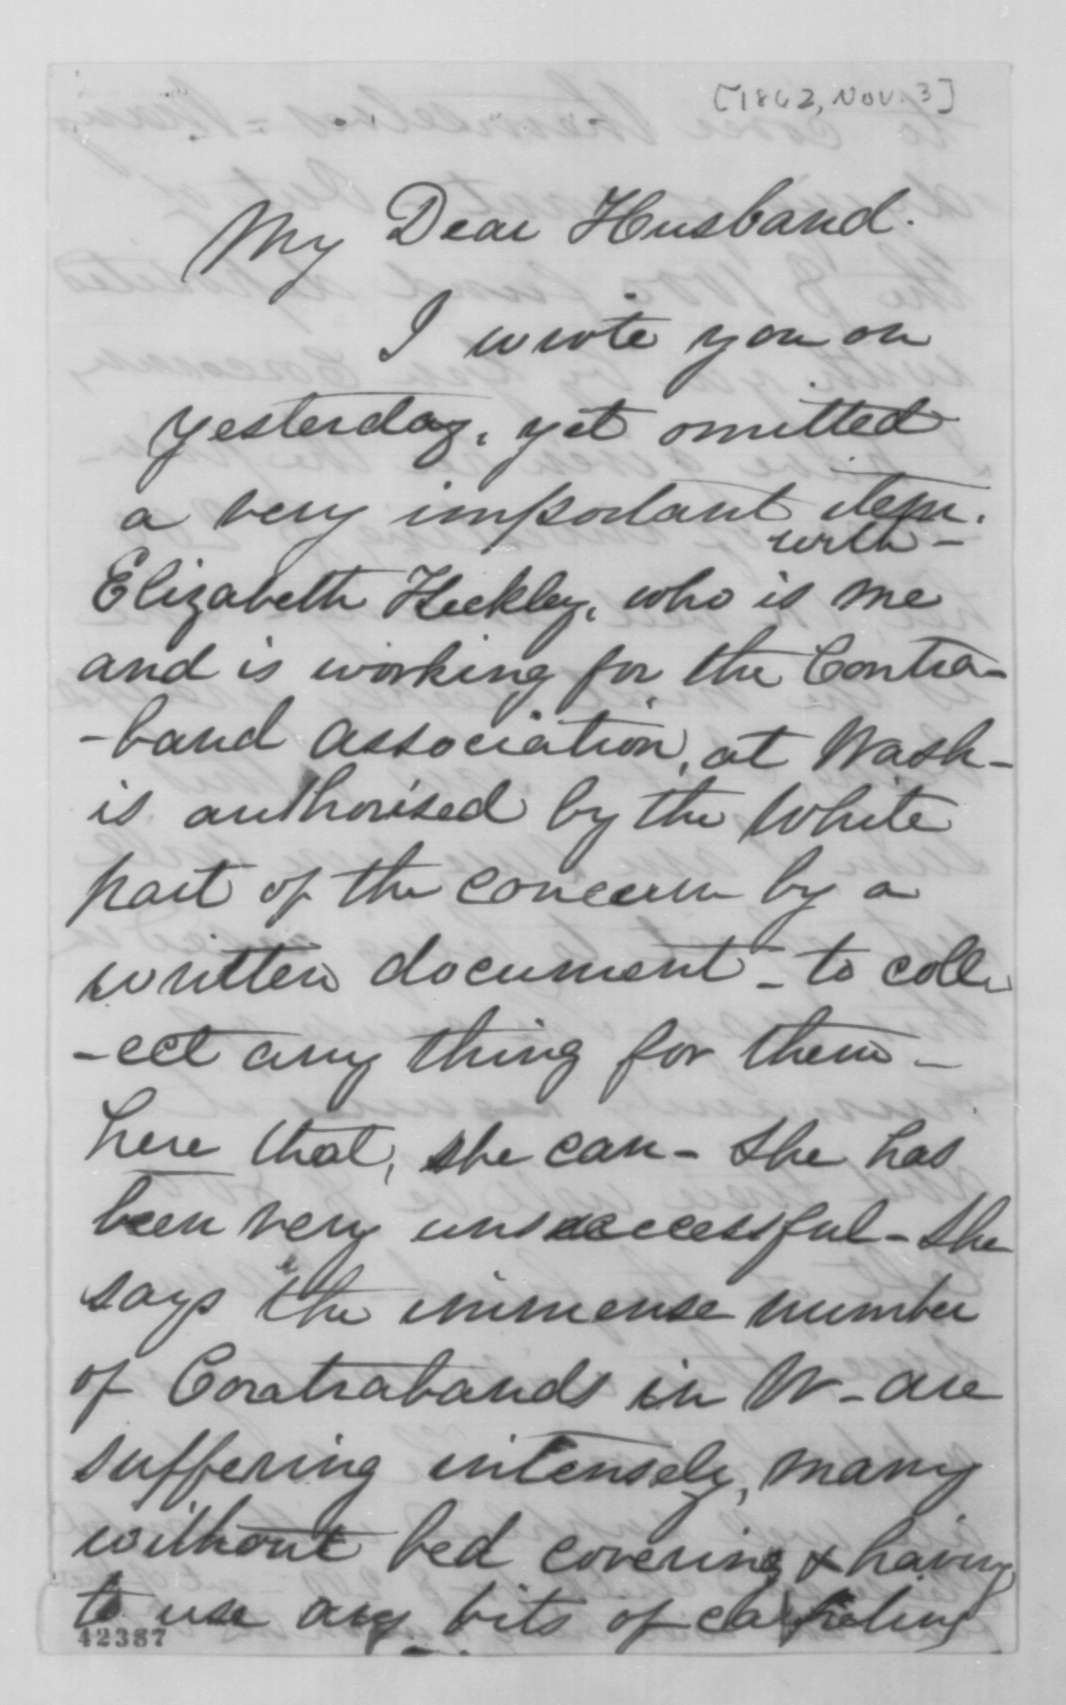 The first page of Mary Lincoln's letter to Abraham Lincoln November 3, 1862 regarding the Contraband Relief Association.